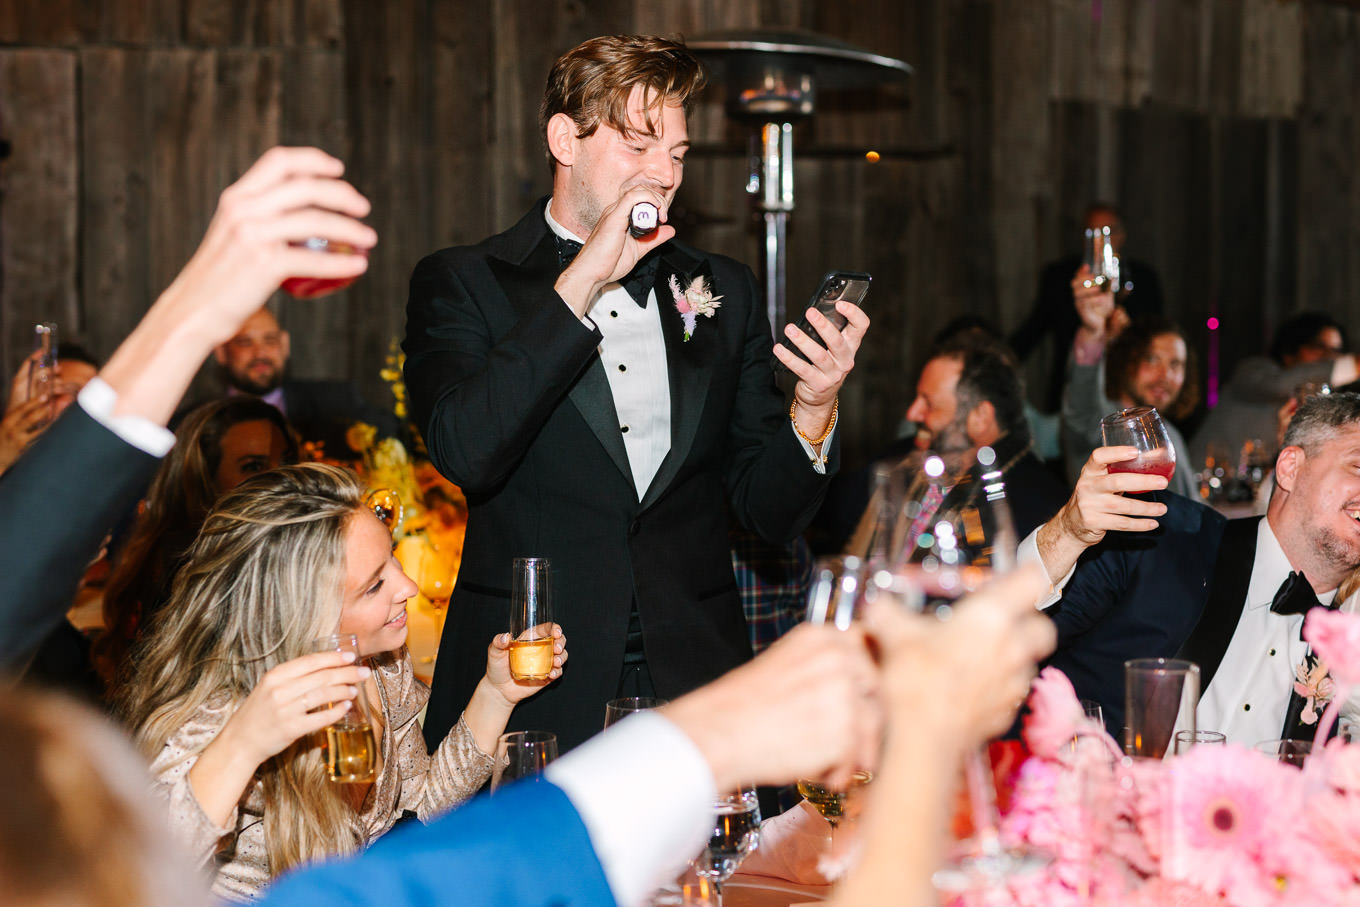 Best man toast at wedding Monochromatic pastel wedding tables | Colorful and quirky wedding at Higuera Ranch in San Luis Obispo | #sanluisobispowedding #californiawedding #higueraranch #madonnainn   
Source: Mary Costa Photography | Los Angeles